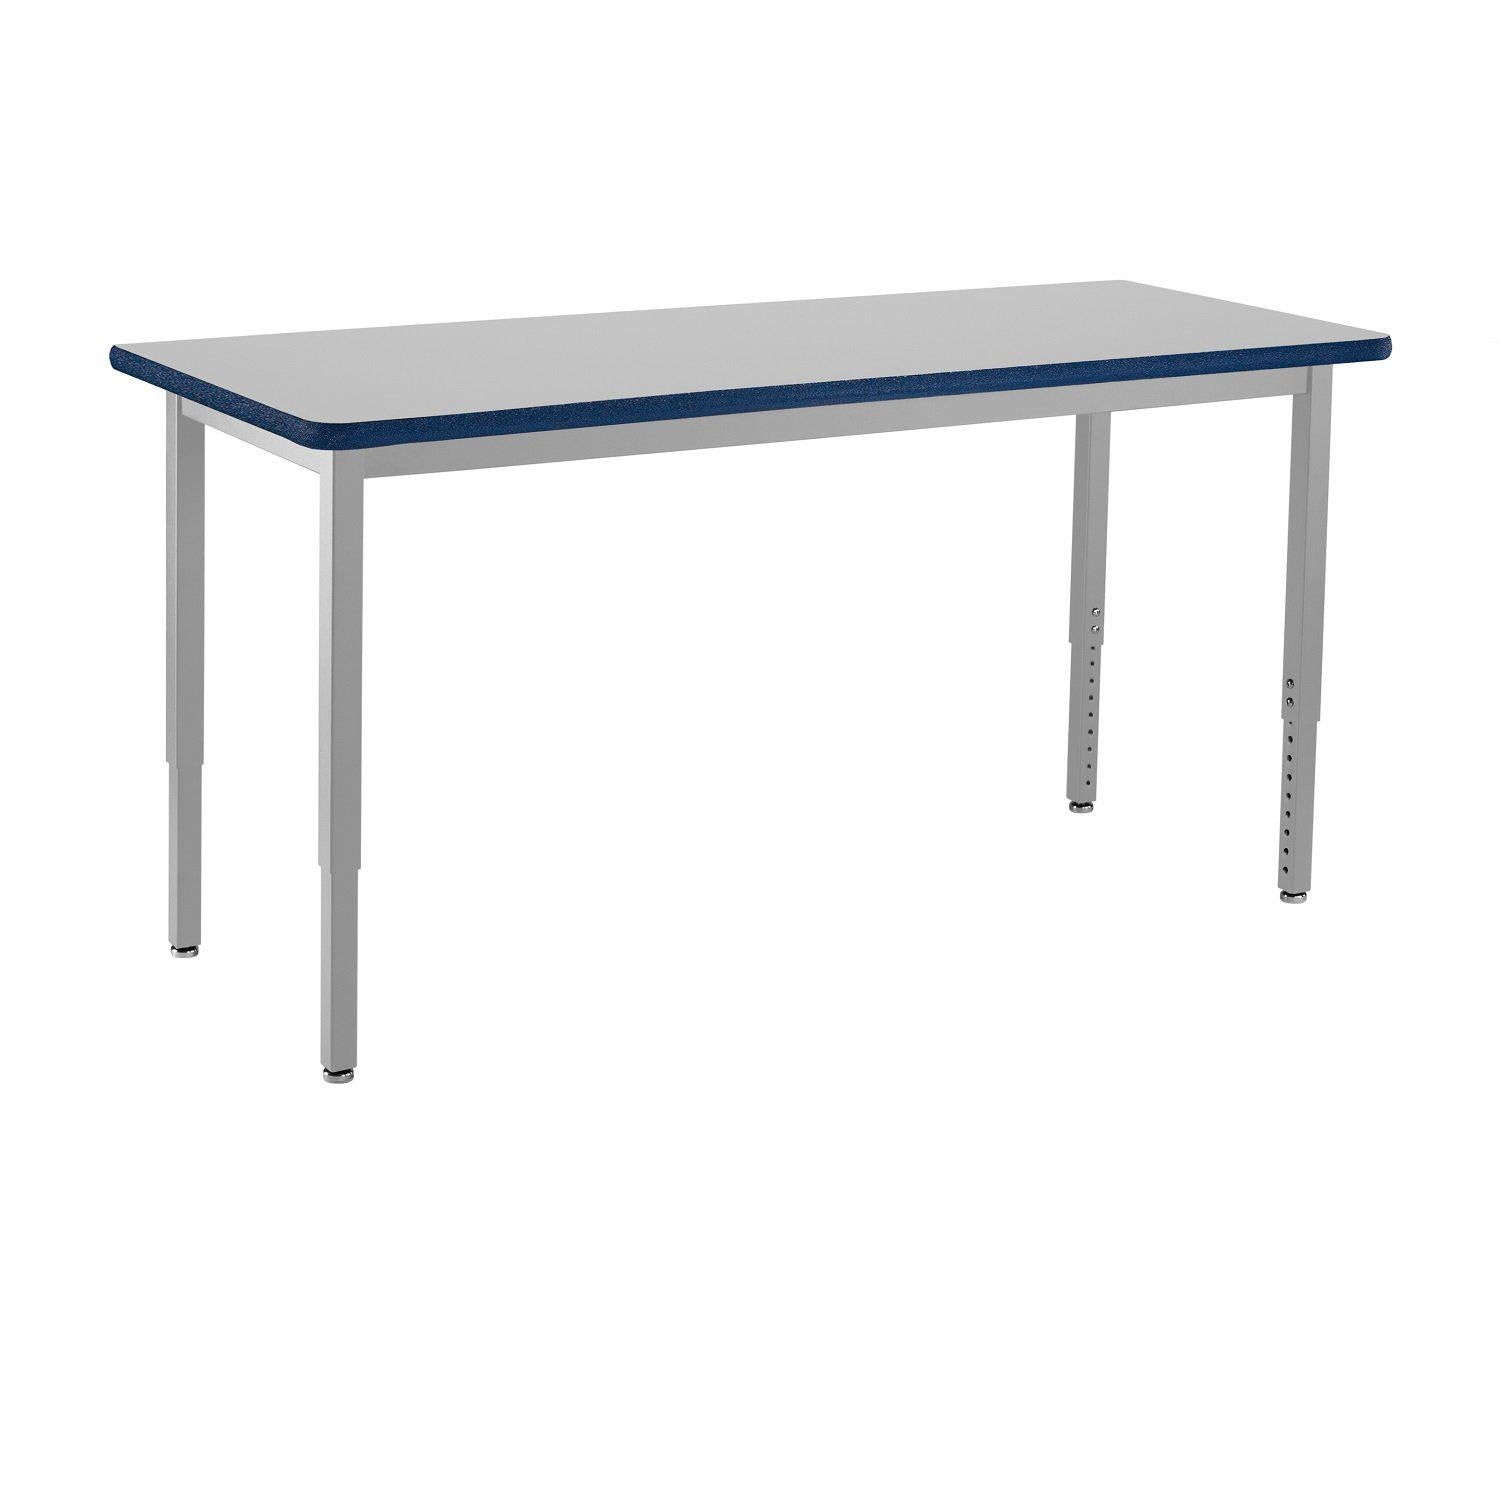 Heavy-Duty Height-Adjustable Utility Table, Soft Grey Frame, 24" x 54", Supreme High-Pressure Laminate Top with Black ProtectEdge